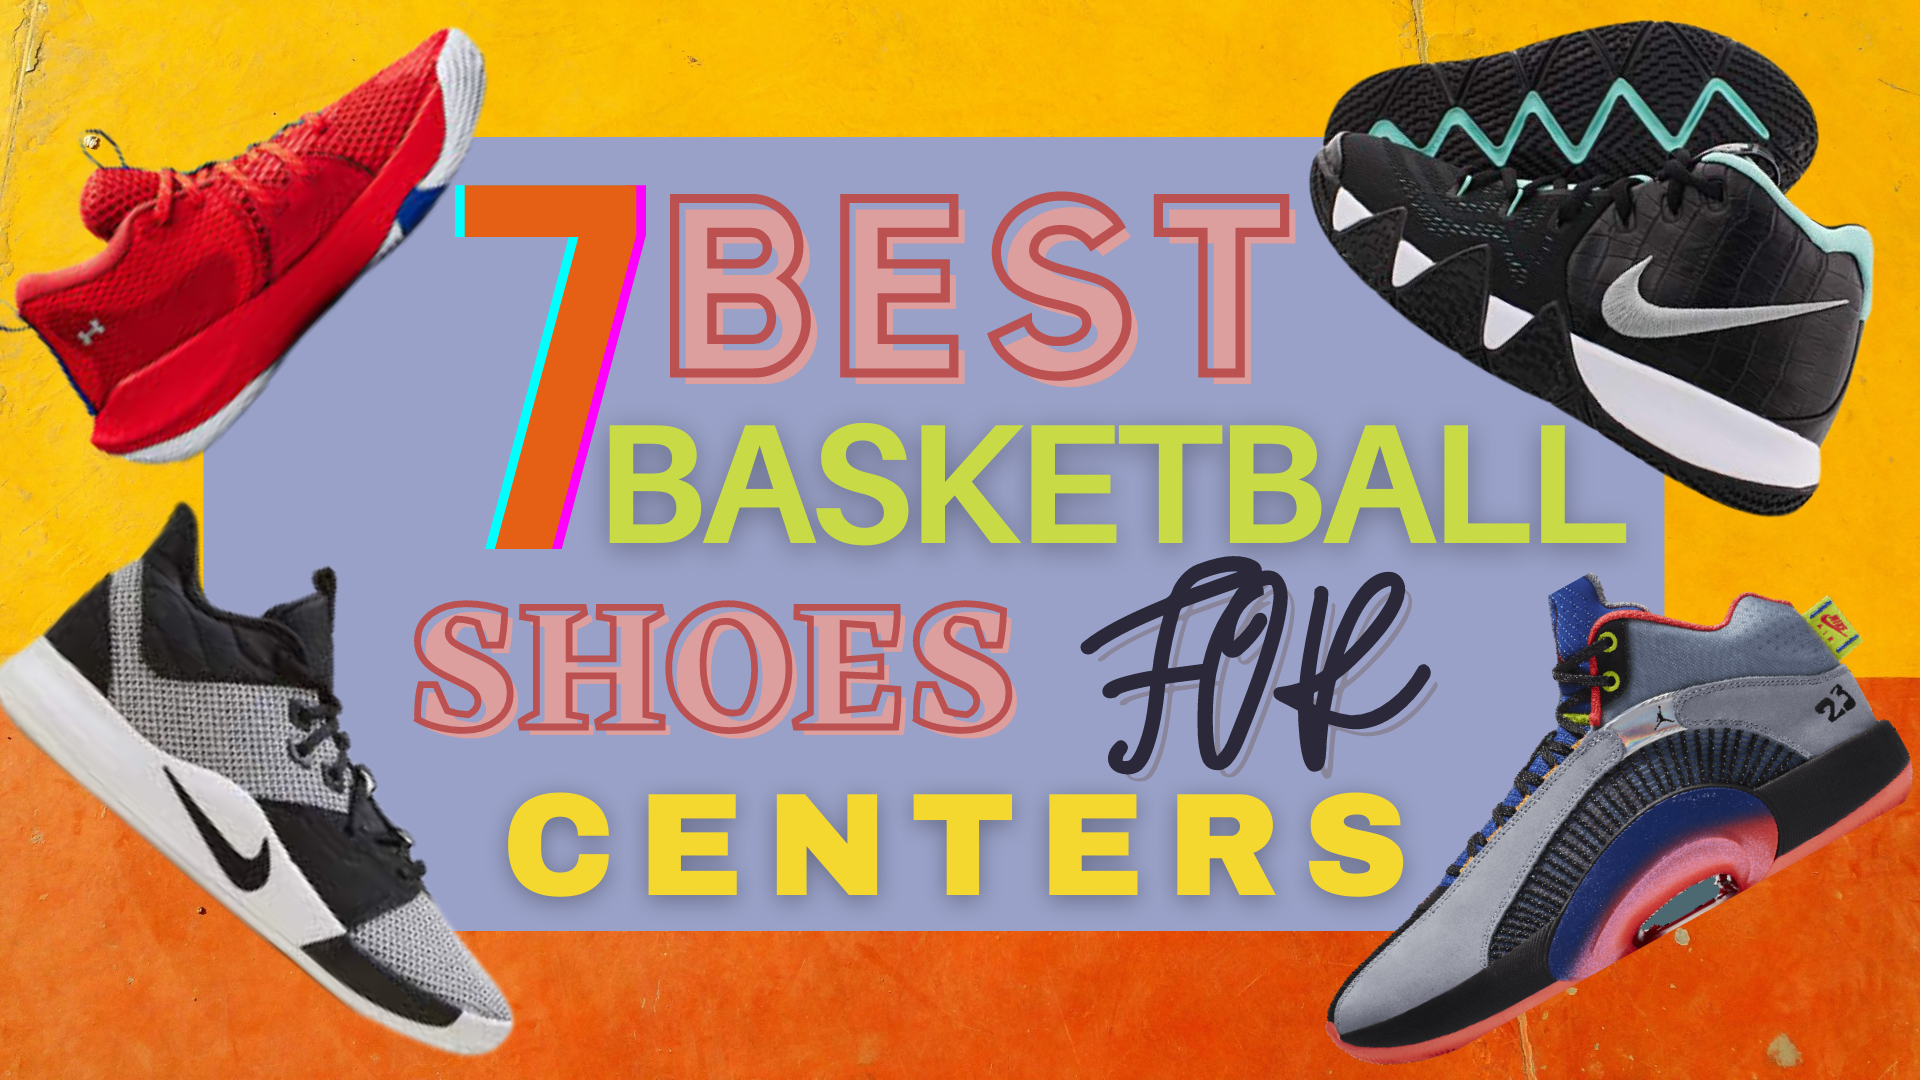 Top 7 Best Basketball Shoes For Centers – Review